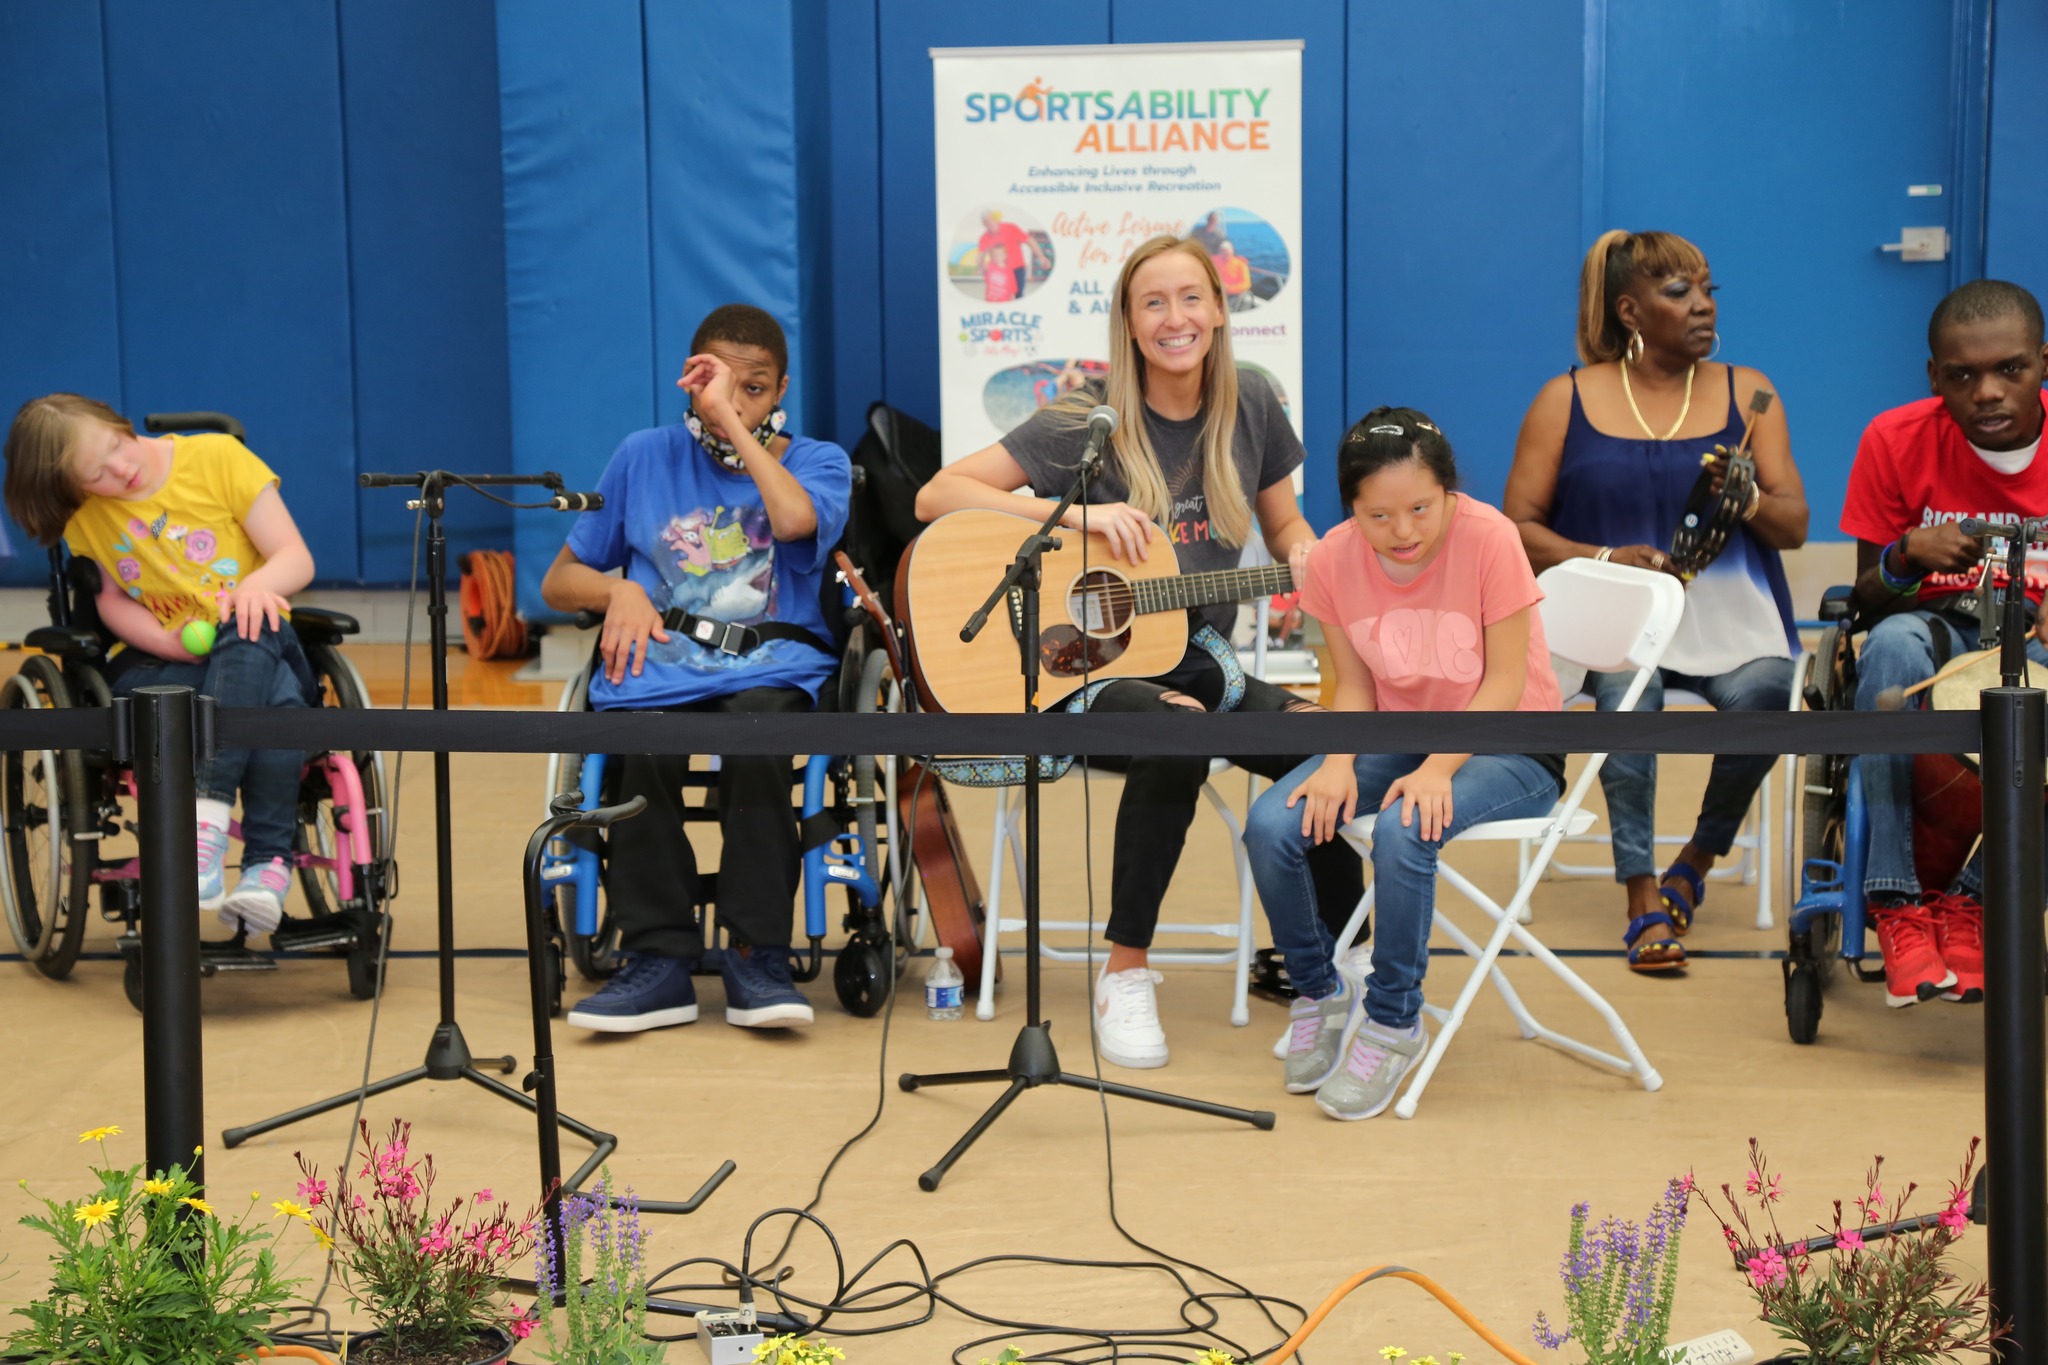 people of all abilities playing instruments